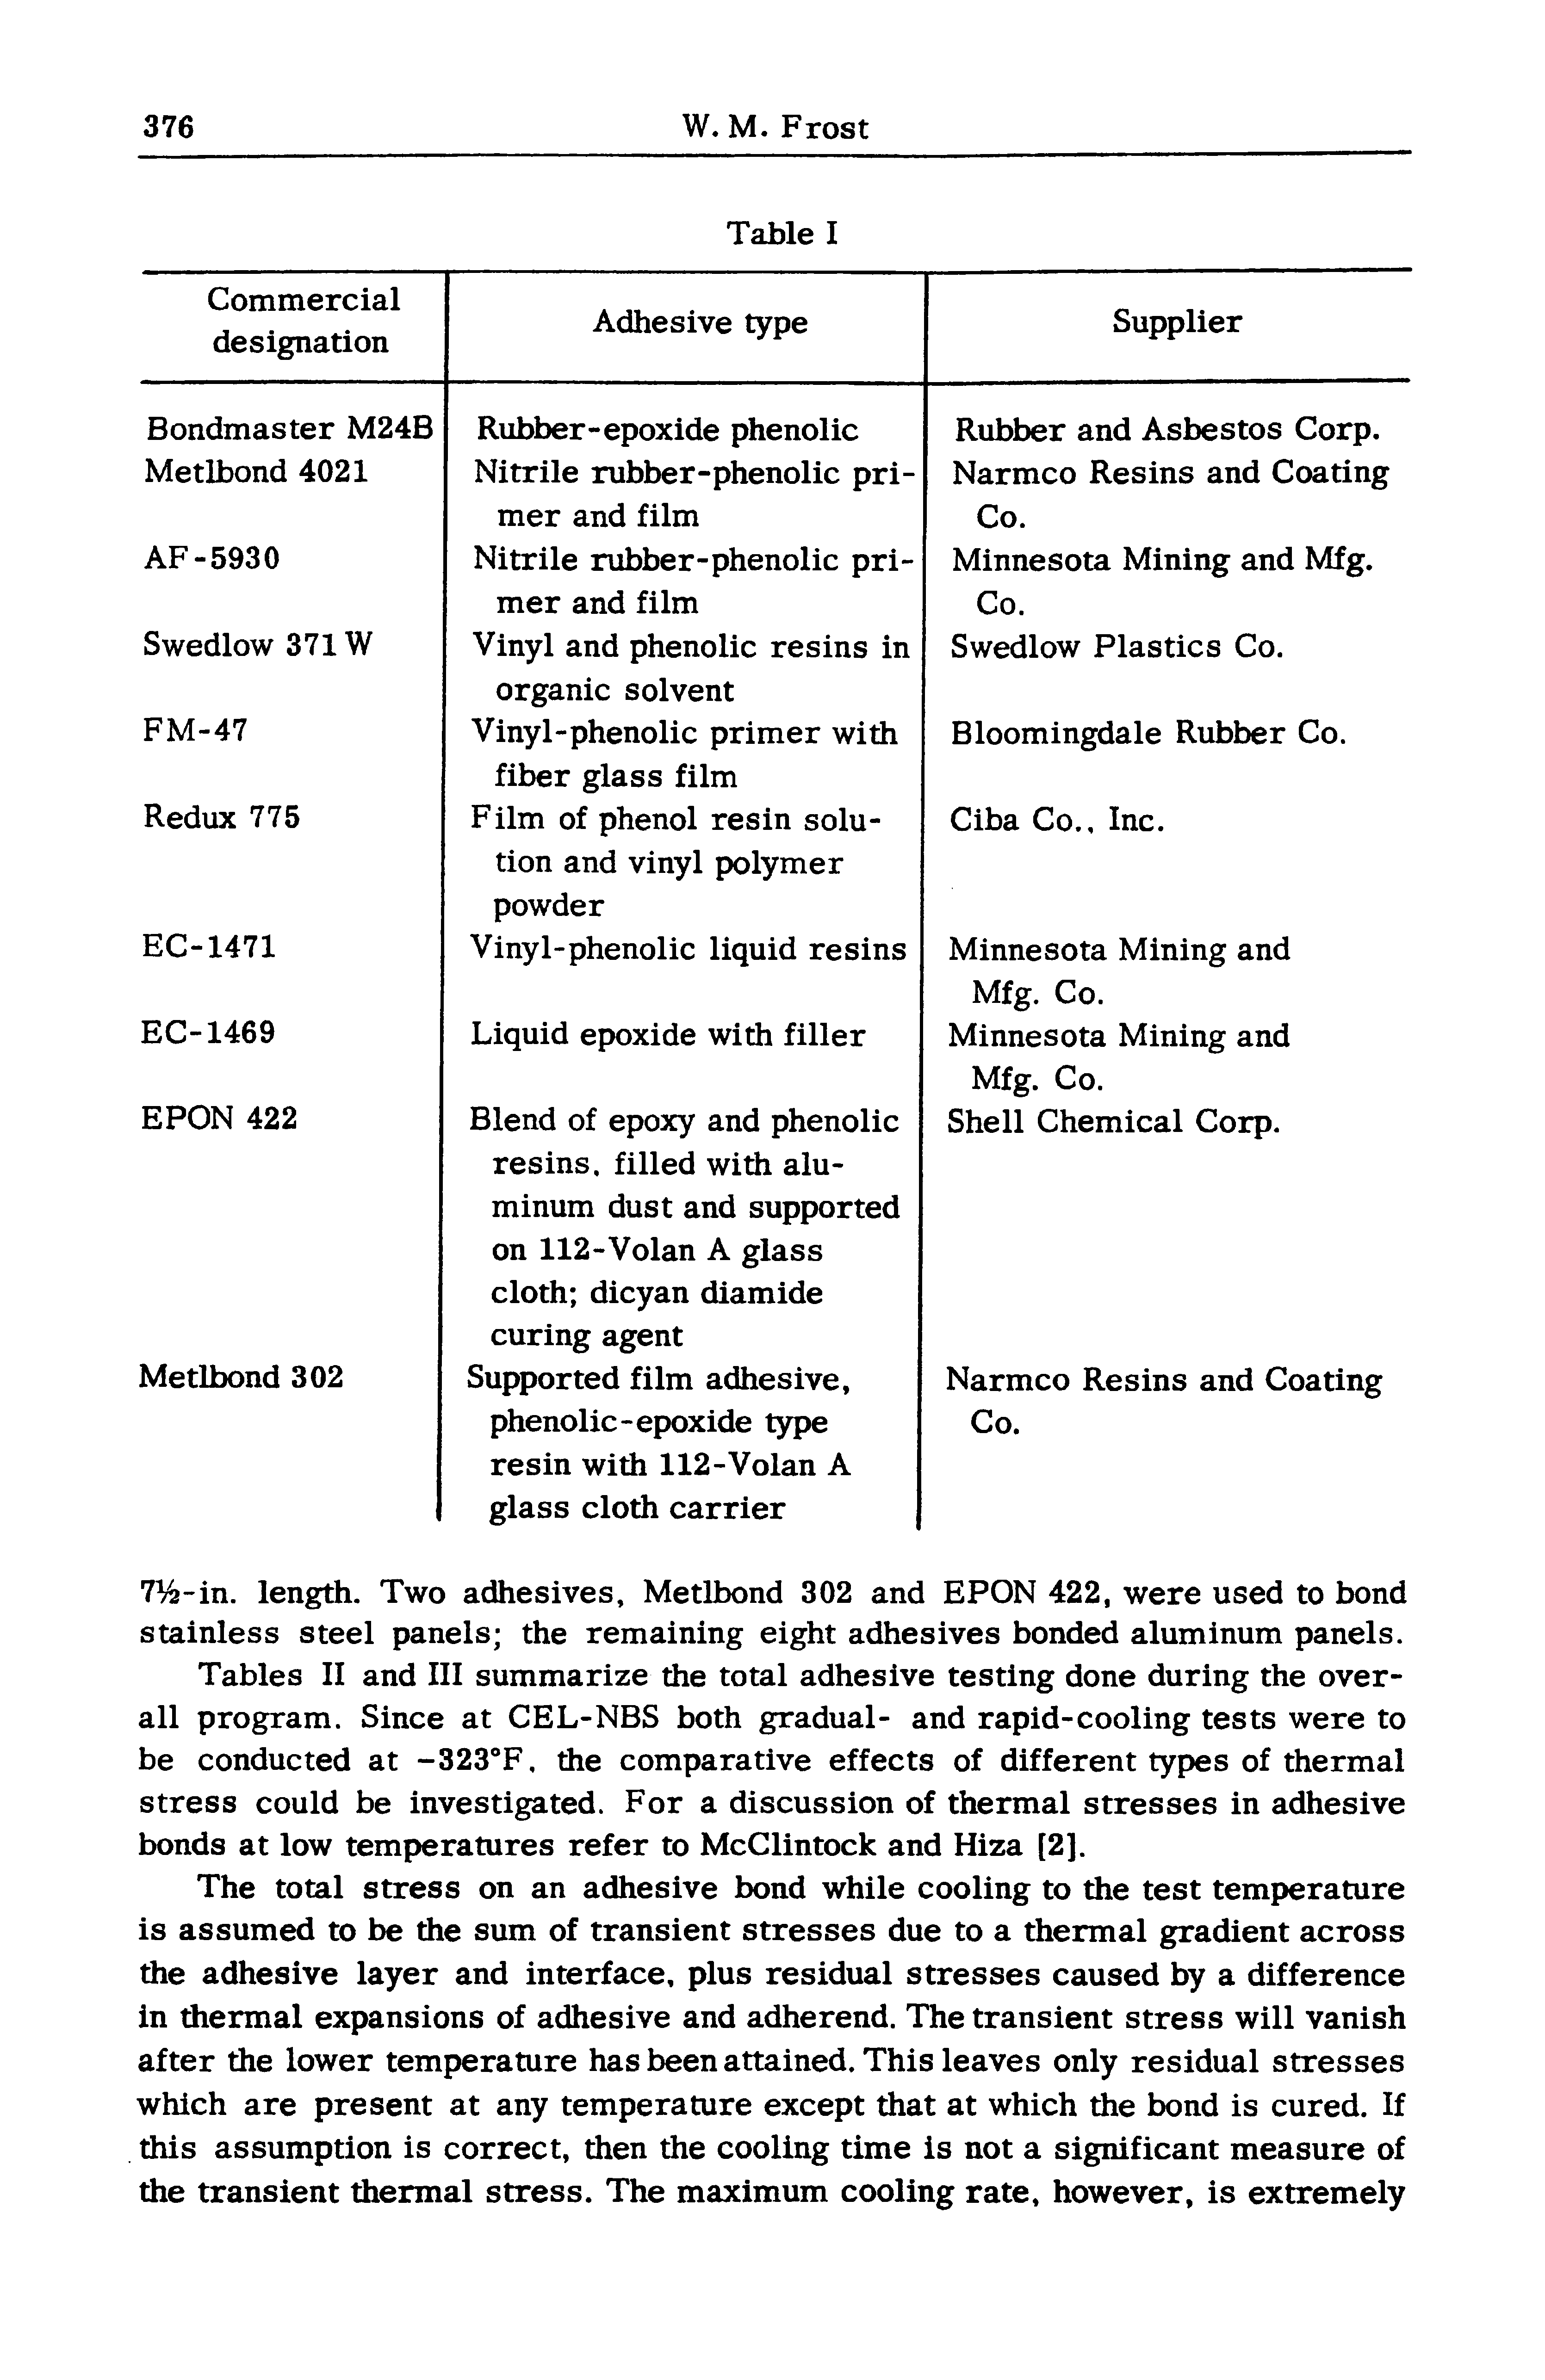 Tables II and III summarize the total adhesive testing done during the overall program. Since at CEL-NBS both gradual- and rapid-cooling tests were to be conducted at -323 F, the comparative effects of different types of thermal stress could be investigated. For a discussion of thermal stresses in adhesive bonds at low temperatures refer to McClintock and Hiza [2].